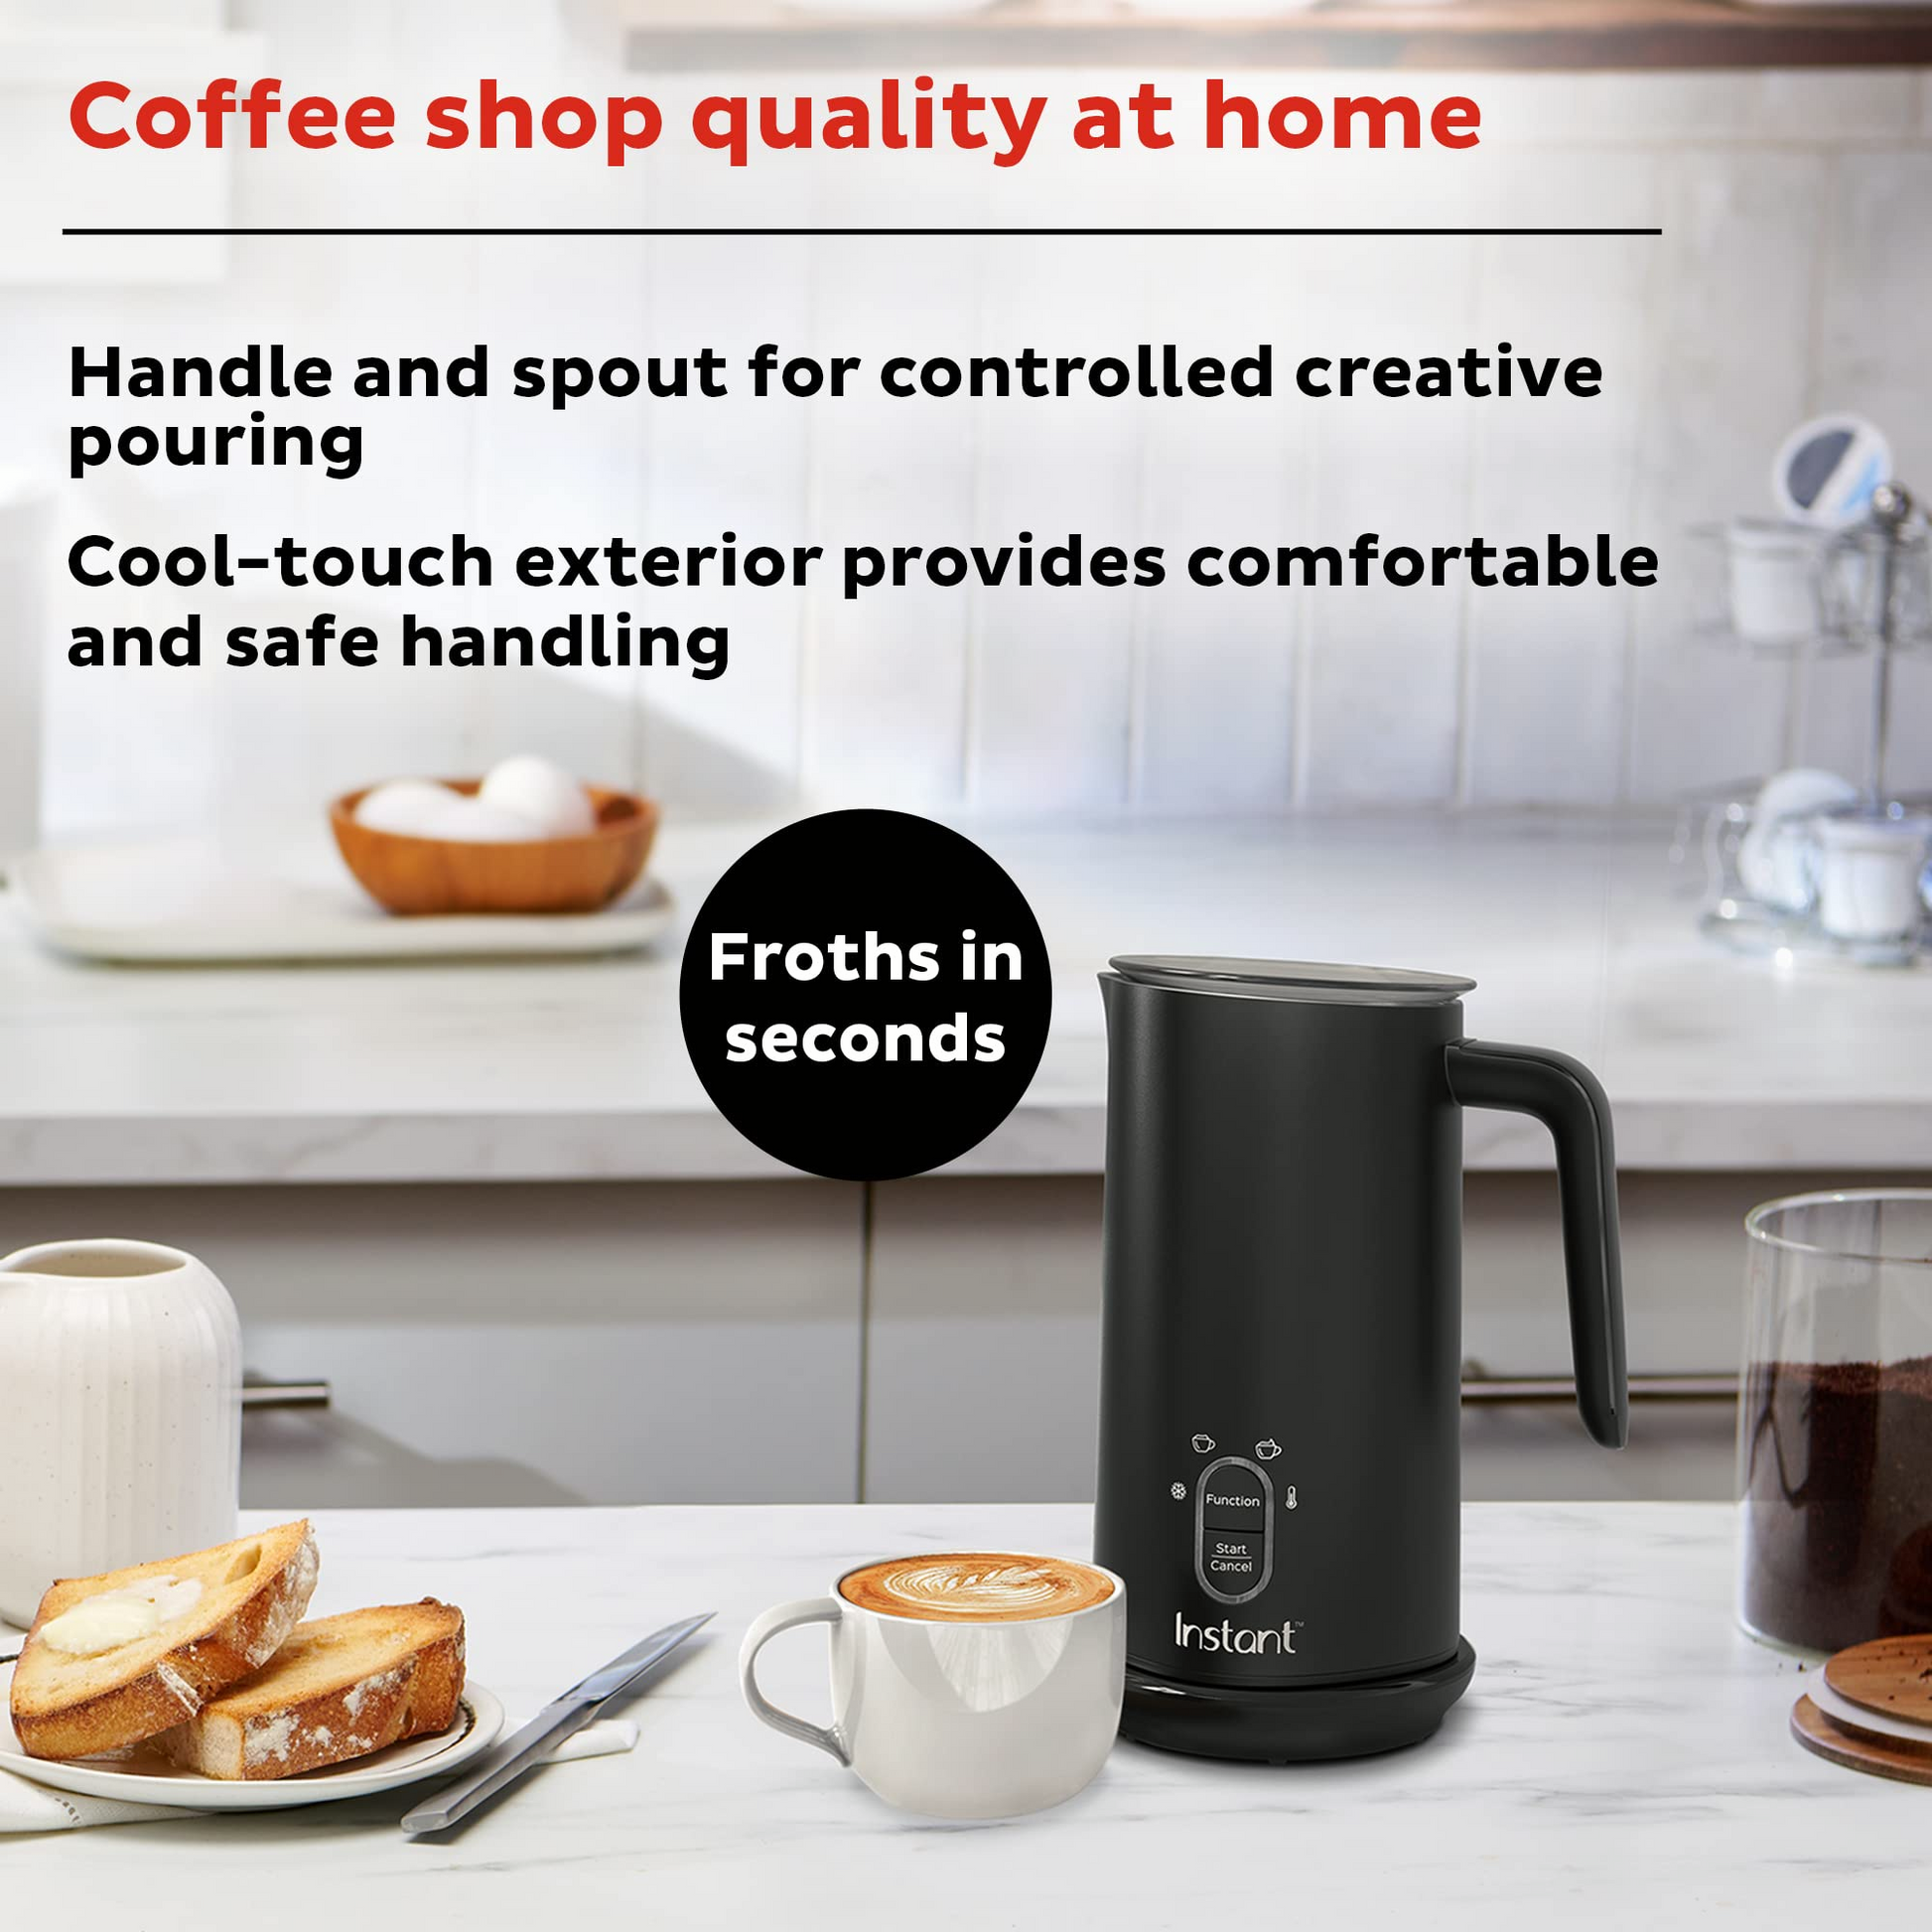 Milk Frother 4 in 1 Electric Milk Steamer Automatic Hot & Cold Foam Maker and Milk Warmer for Latte, Cappuccinos, Macchiato, Hot Chocolate Milk